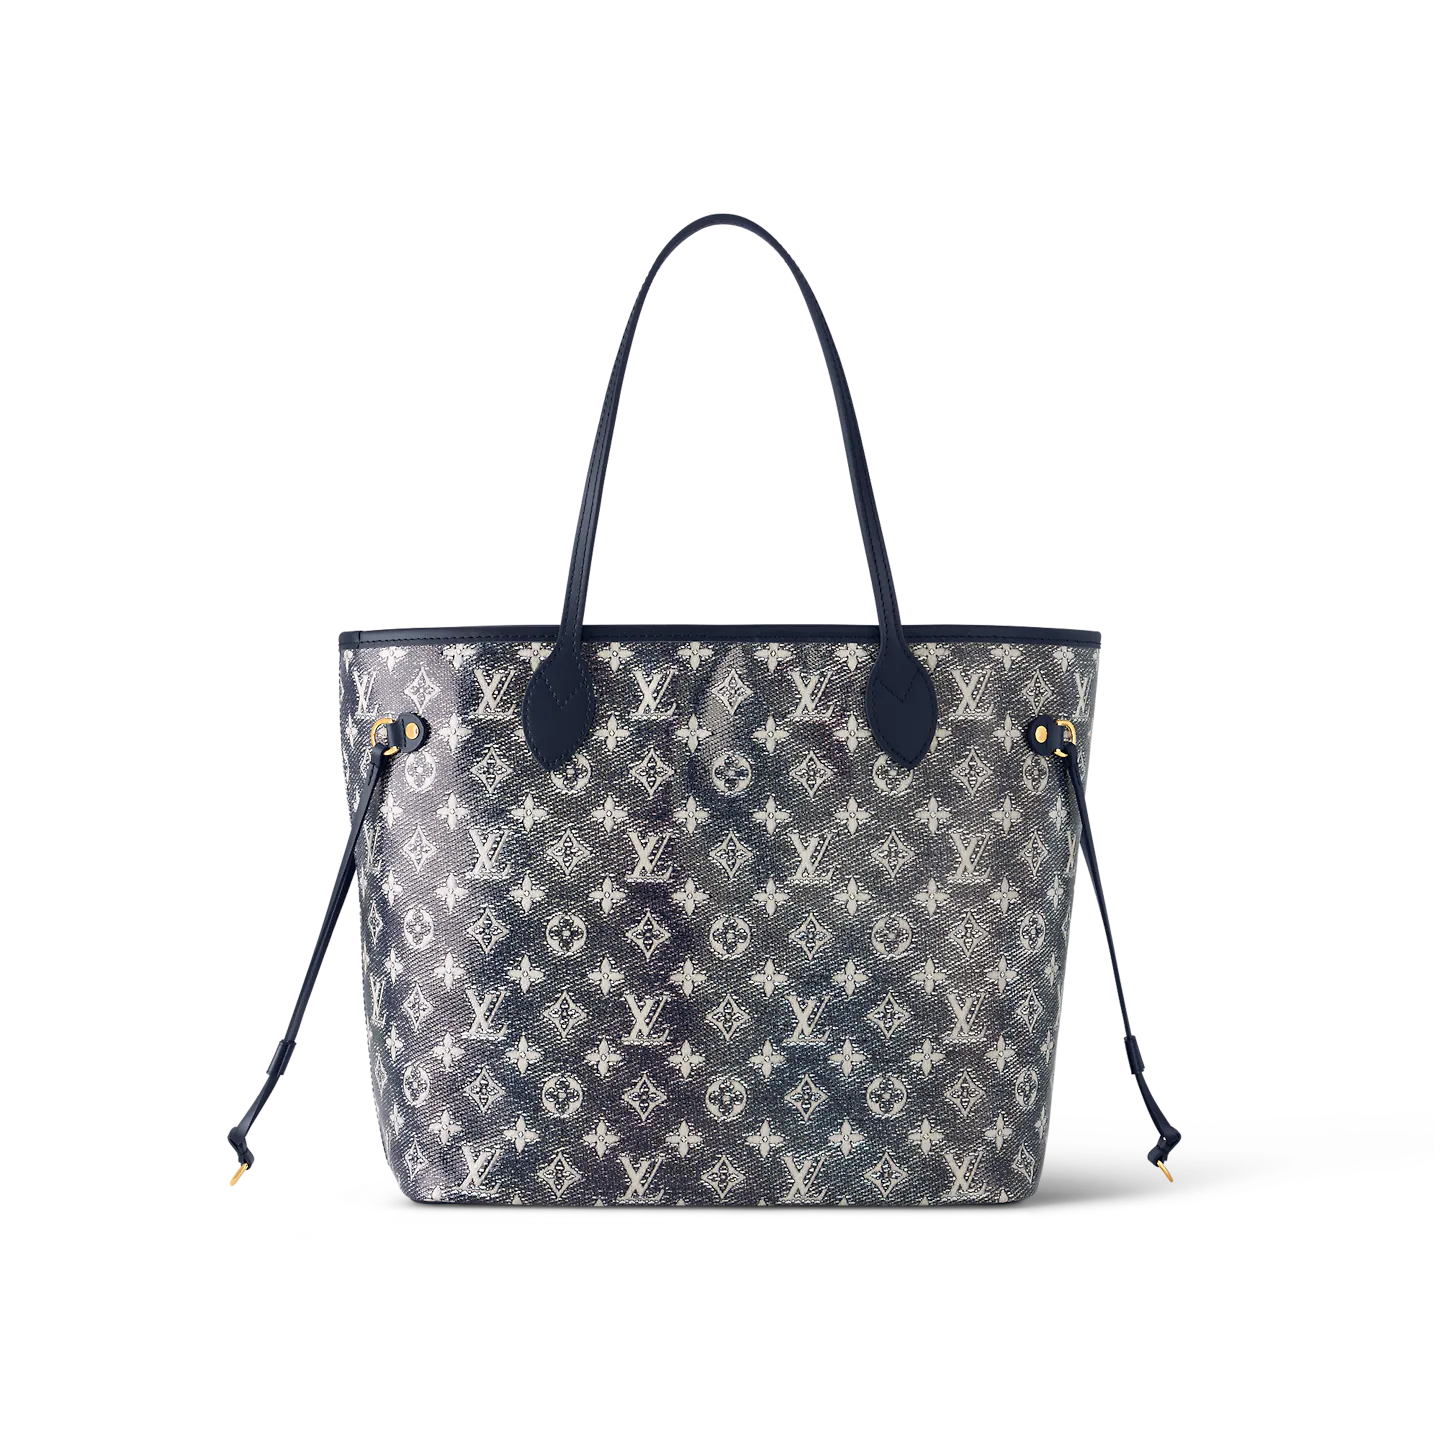 Louis Vuitton Neverfull: The Tote That is Truly Never Full